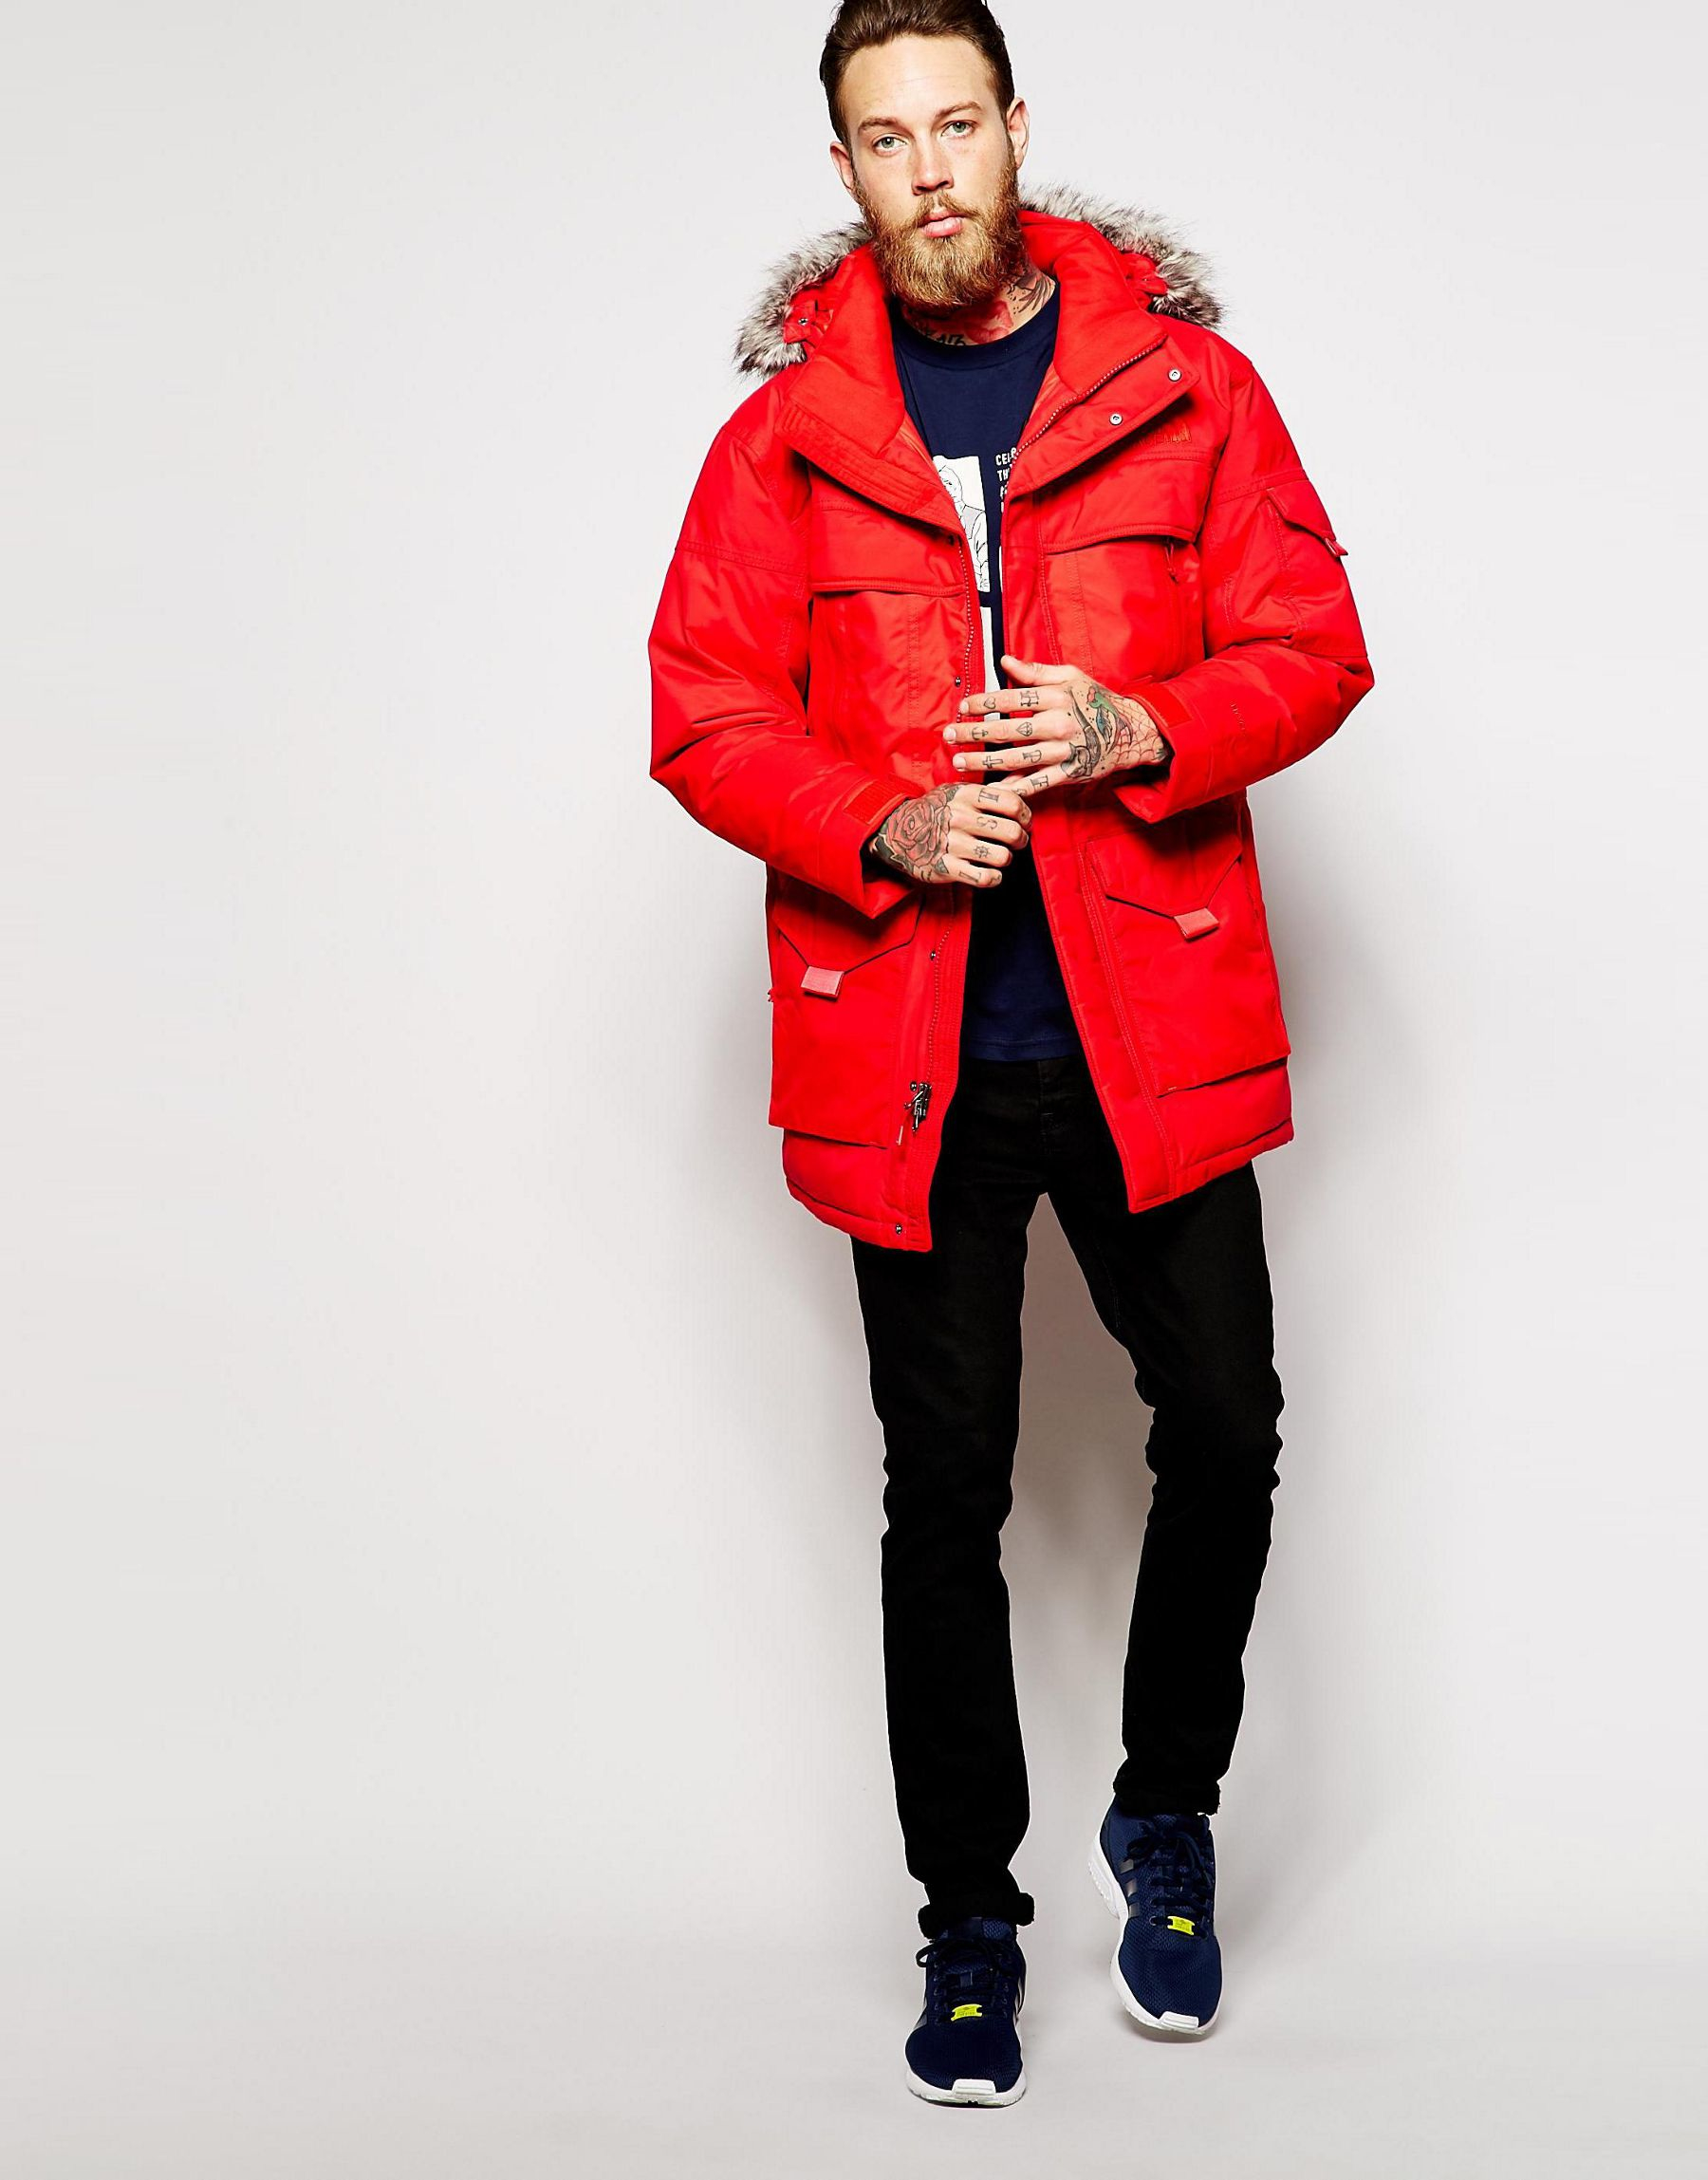 The North Face Red Parka Flash Sales, 54% OFF | panni.com